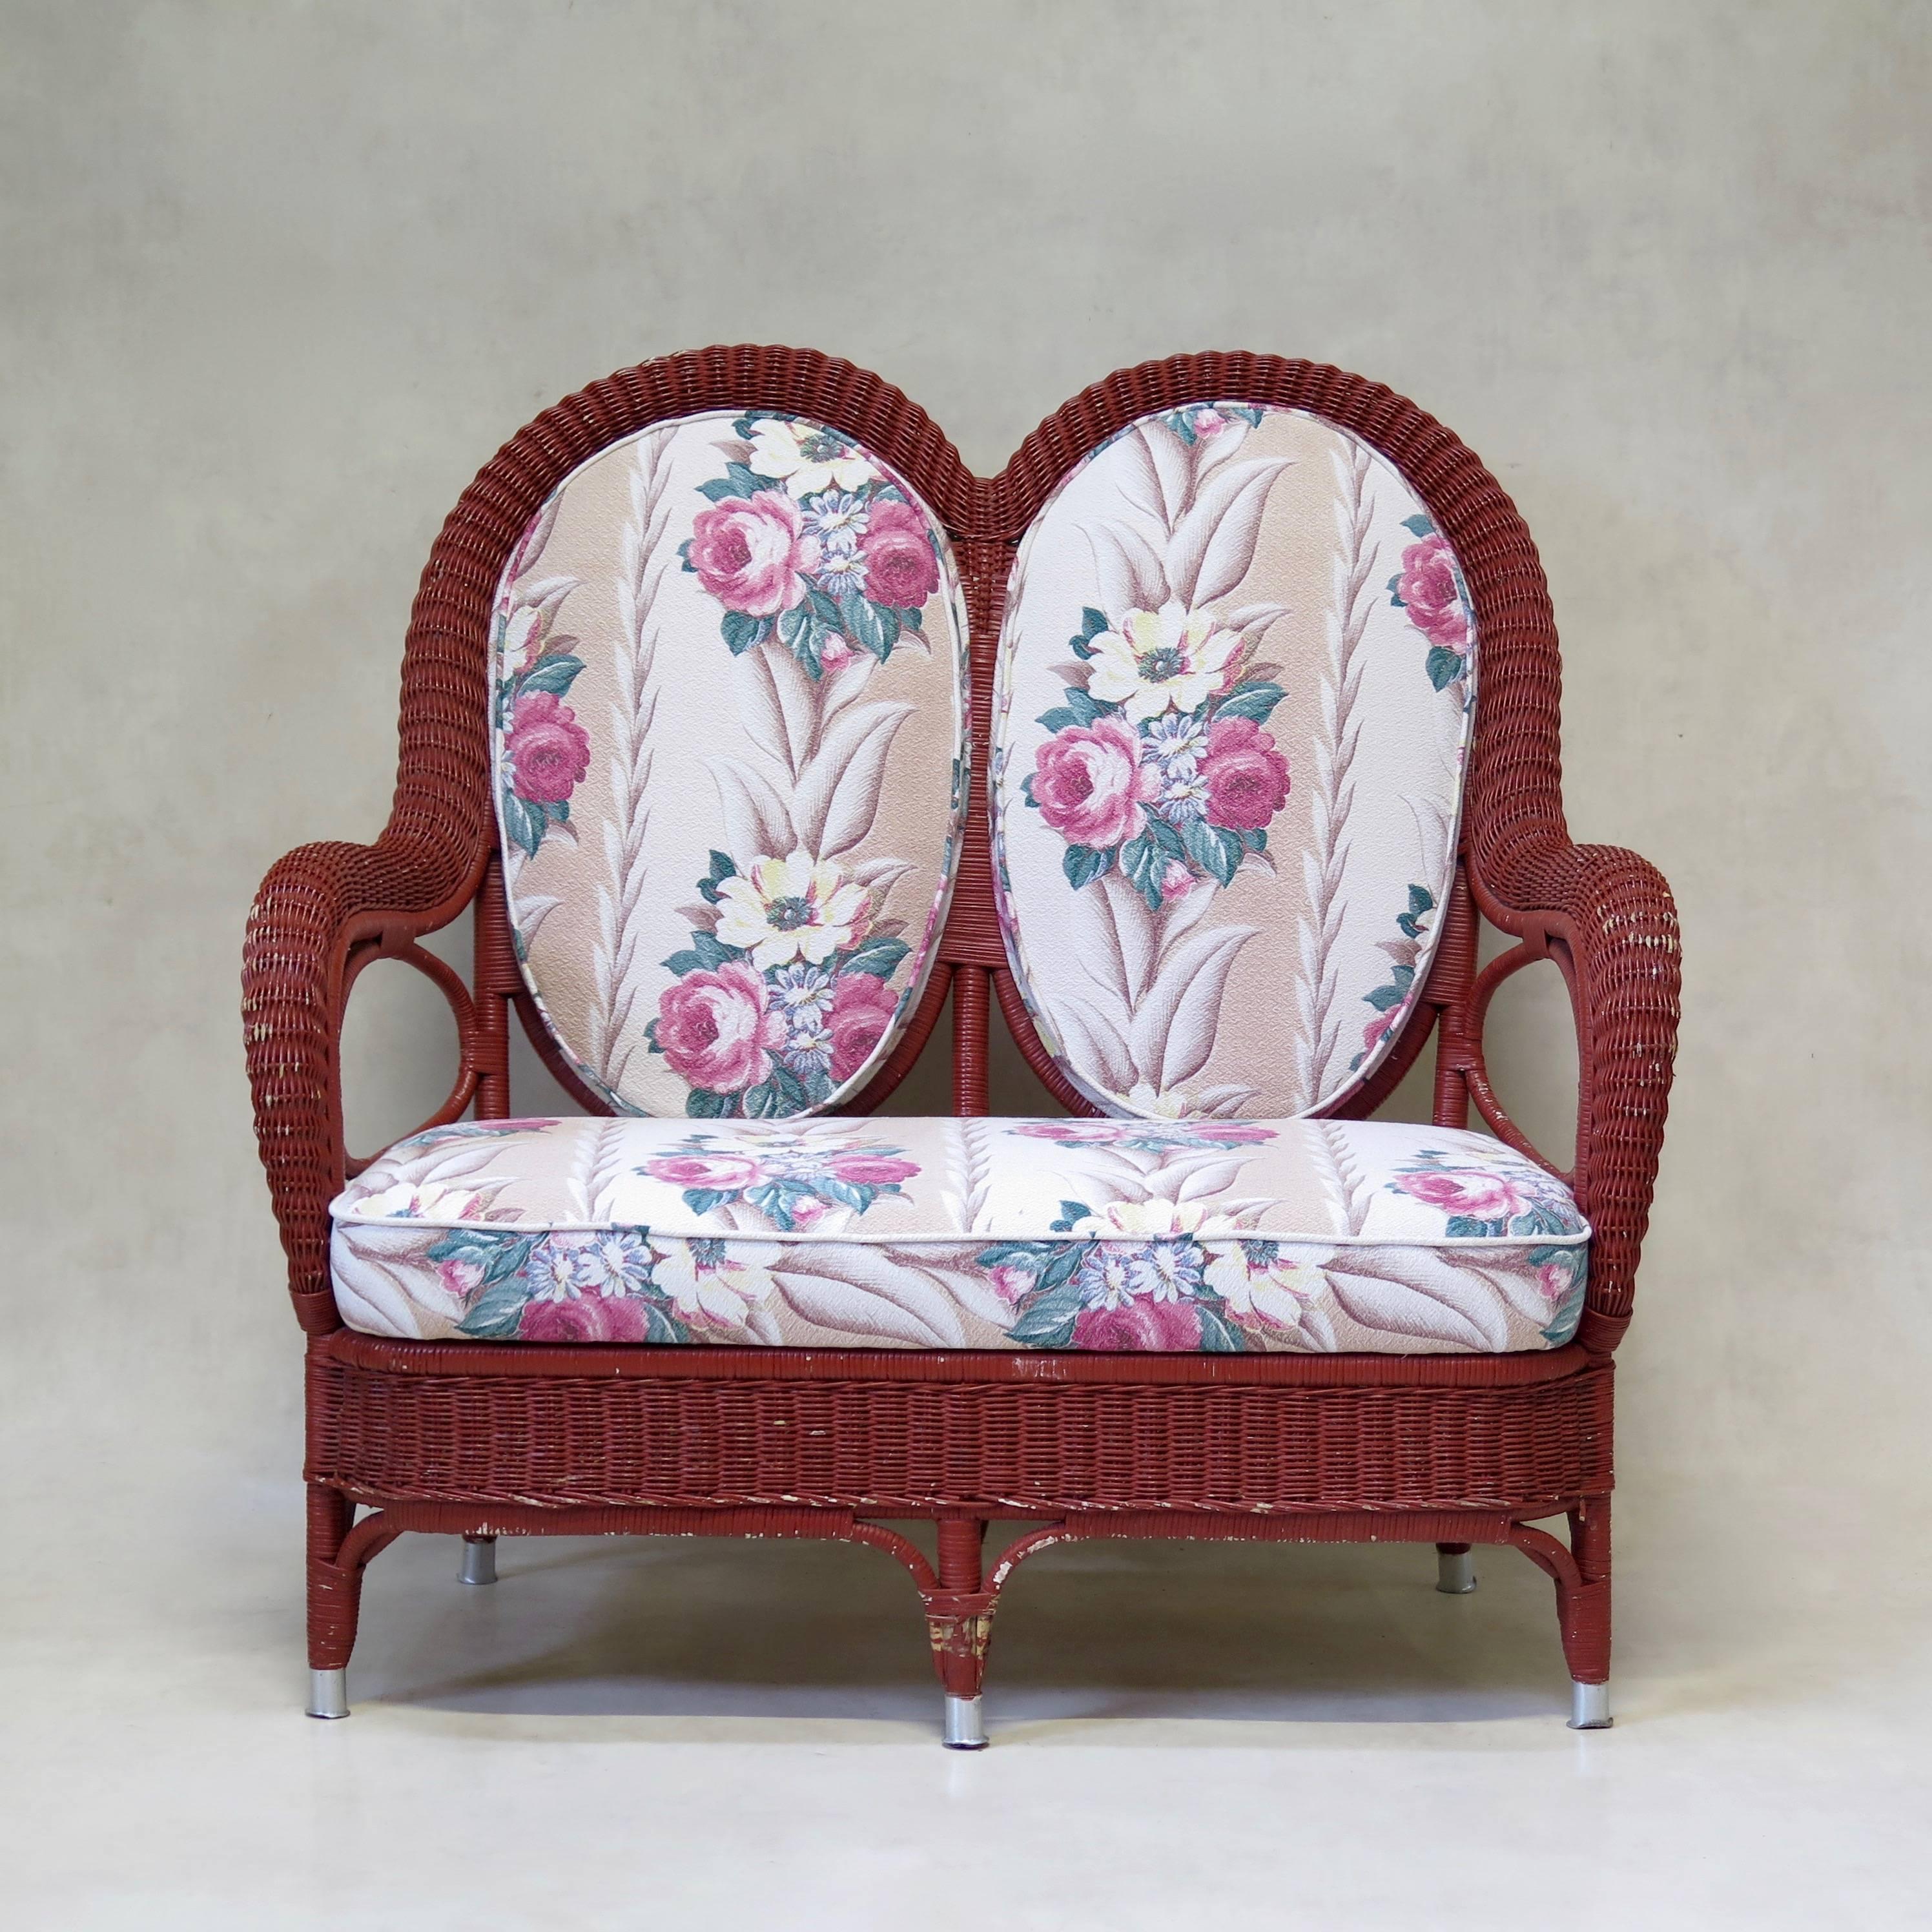 Comfortable and charming living-room or veranda seating set composed of a two-seat sofa and a pair of armchairs. Painted in the original deep red-colored paint. Newly upholstered in vintage fabric. The feet are clad in aluminium-type metal.